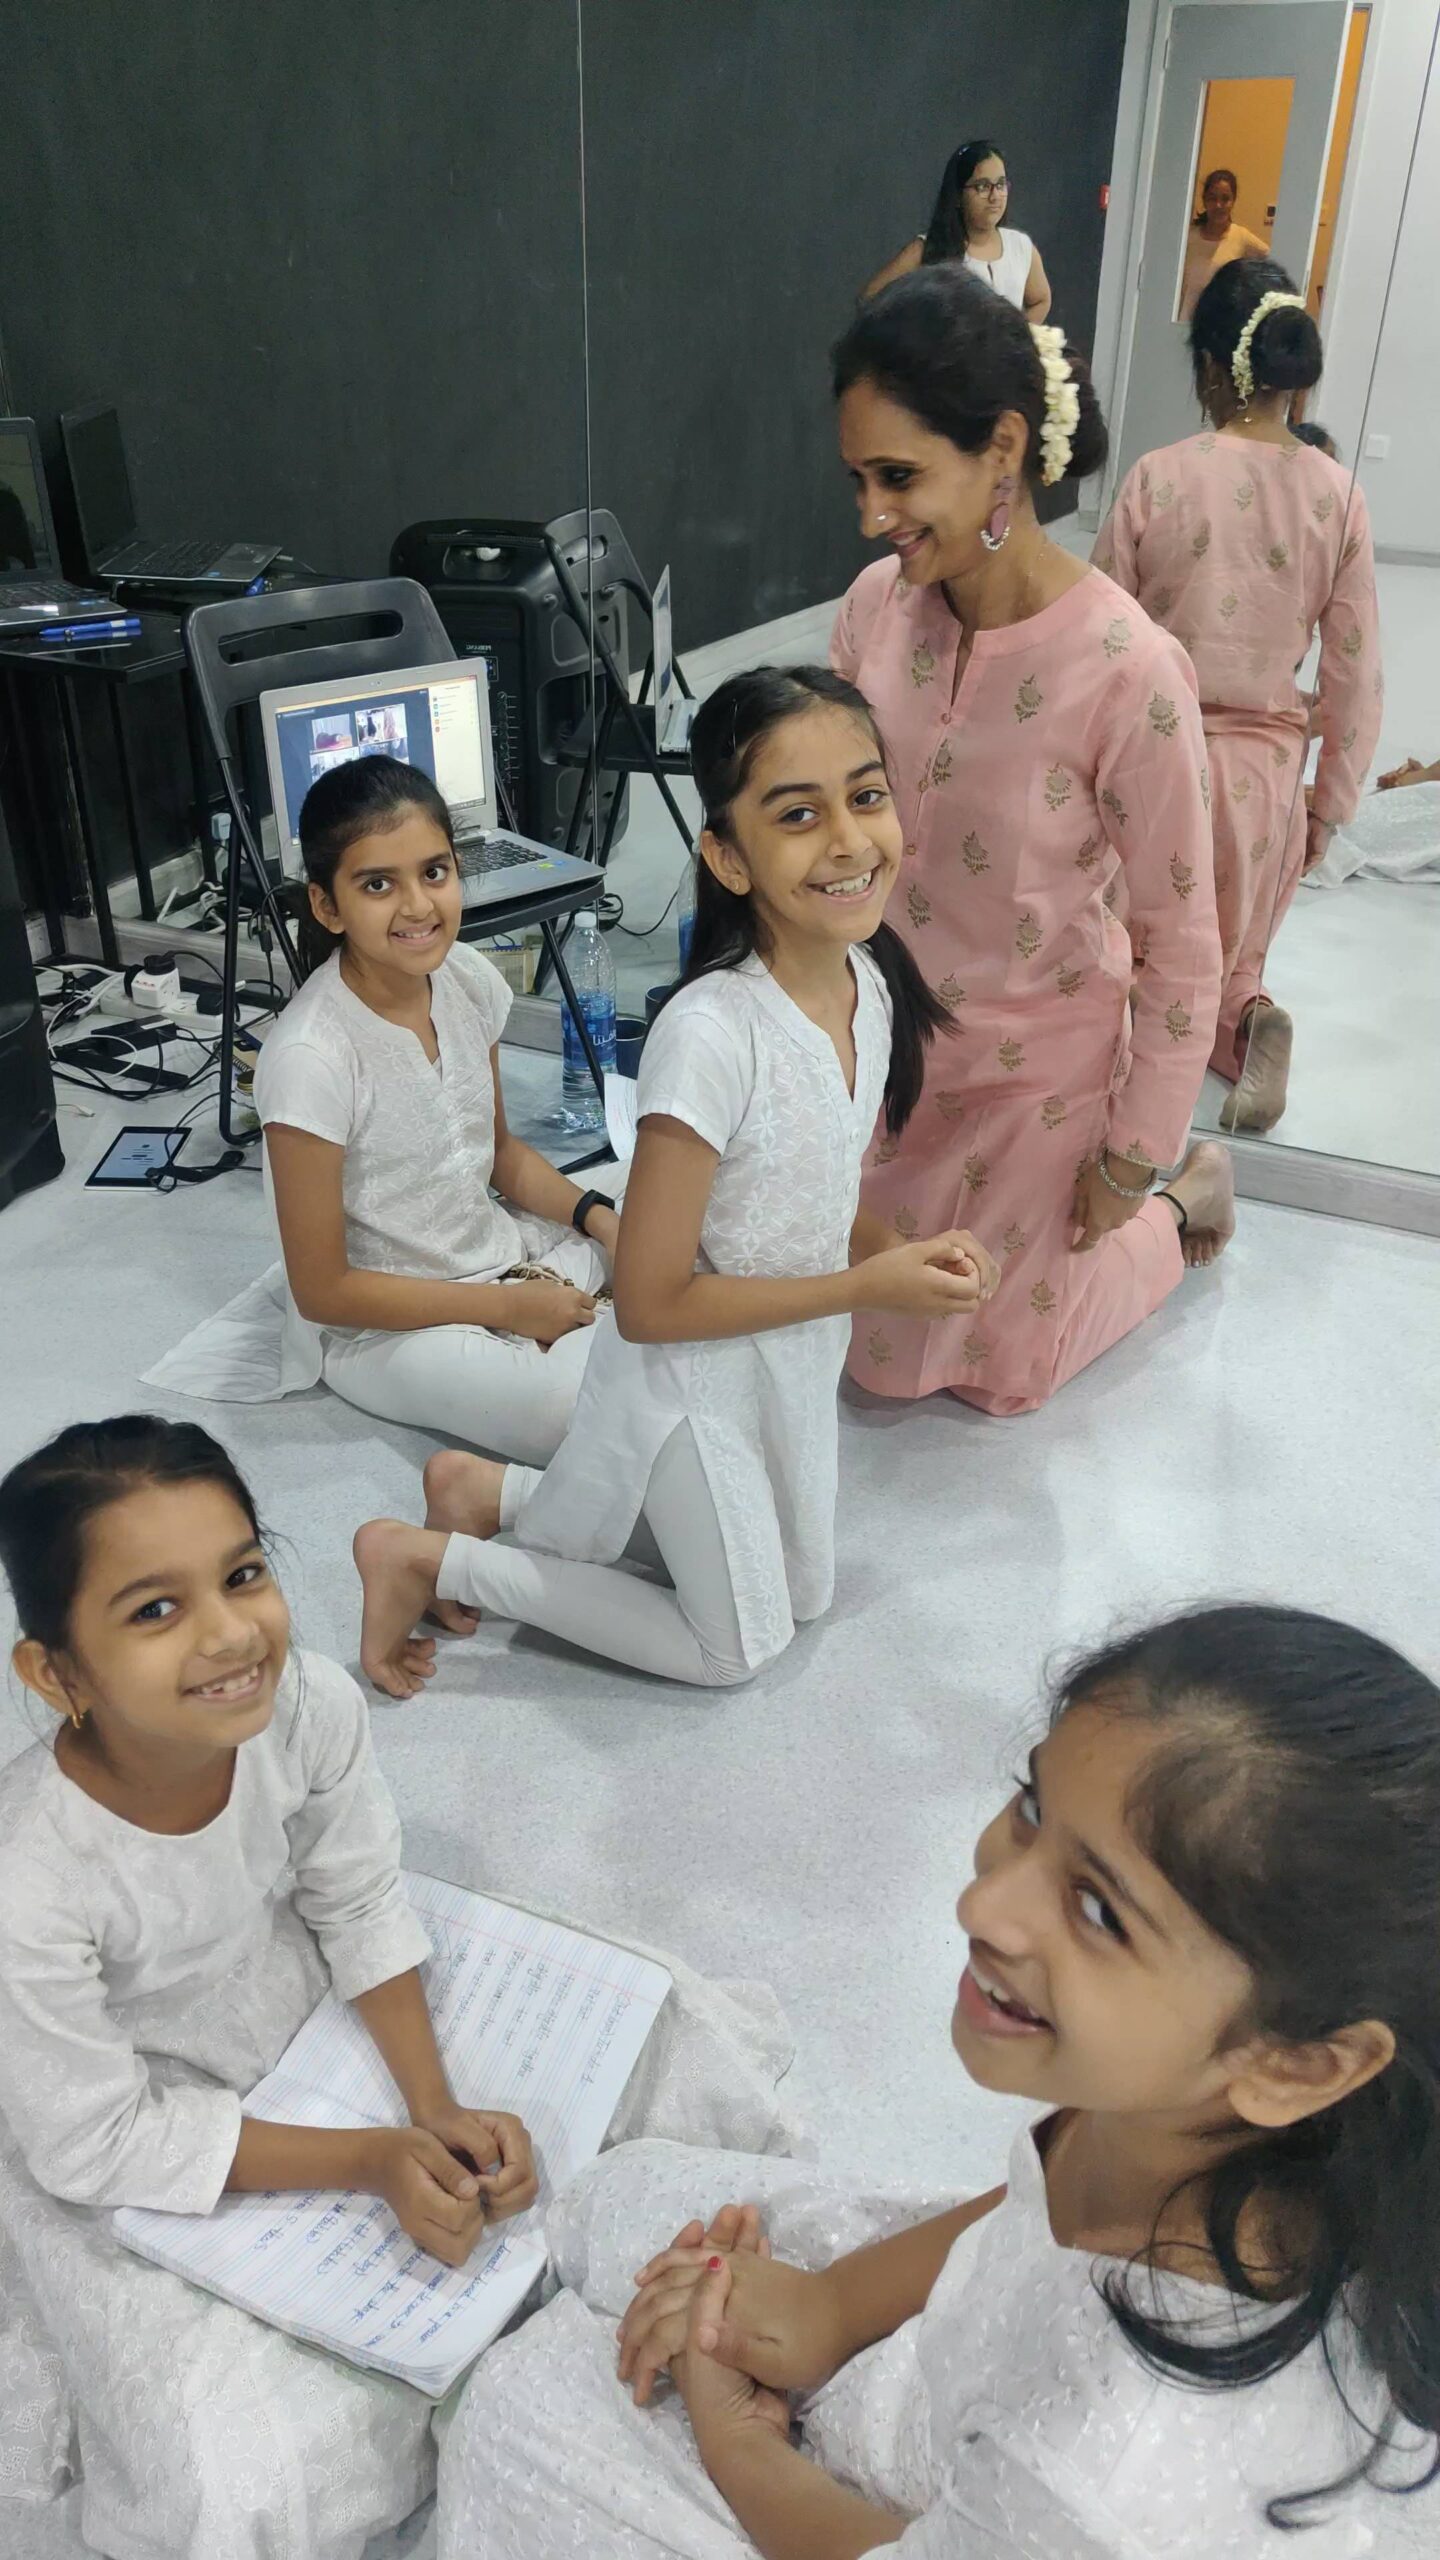 Grade 2 kids learnt a new tukdas today. And they can teach you too. With Dhanashree Ma'am at Gurukul Studios.